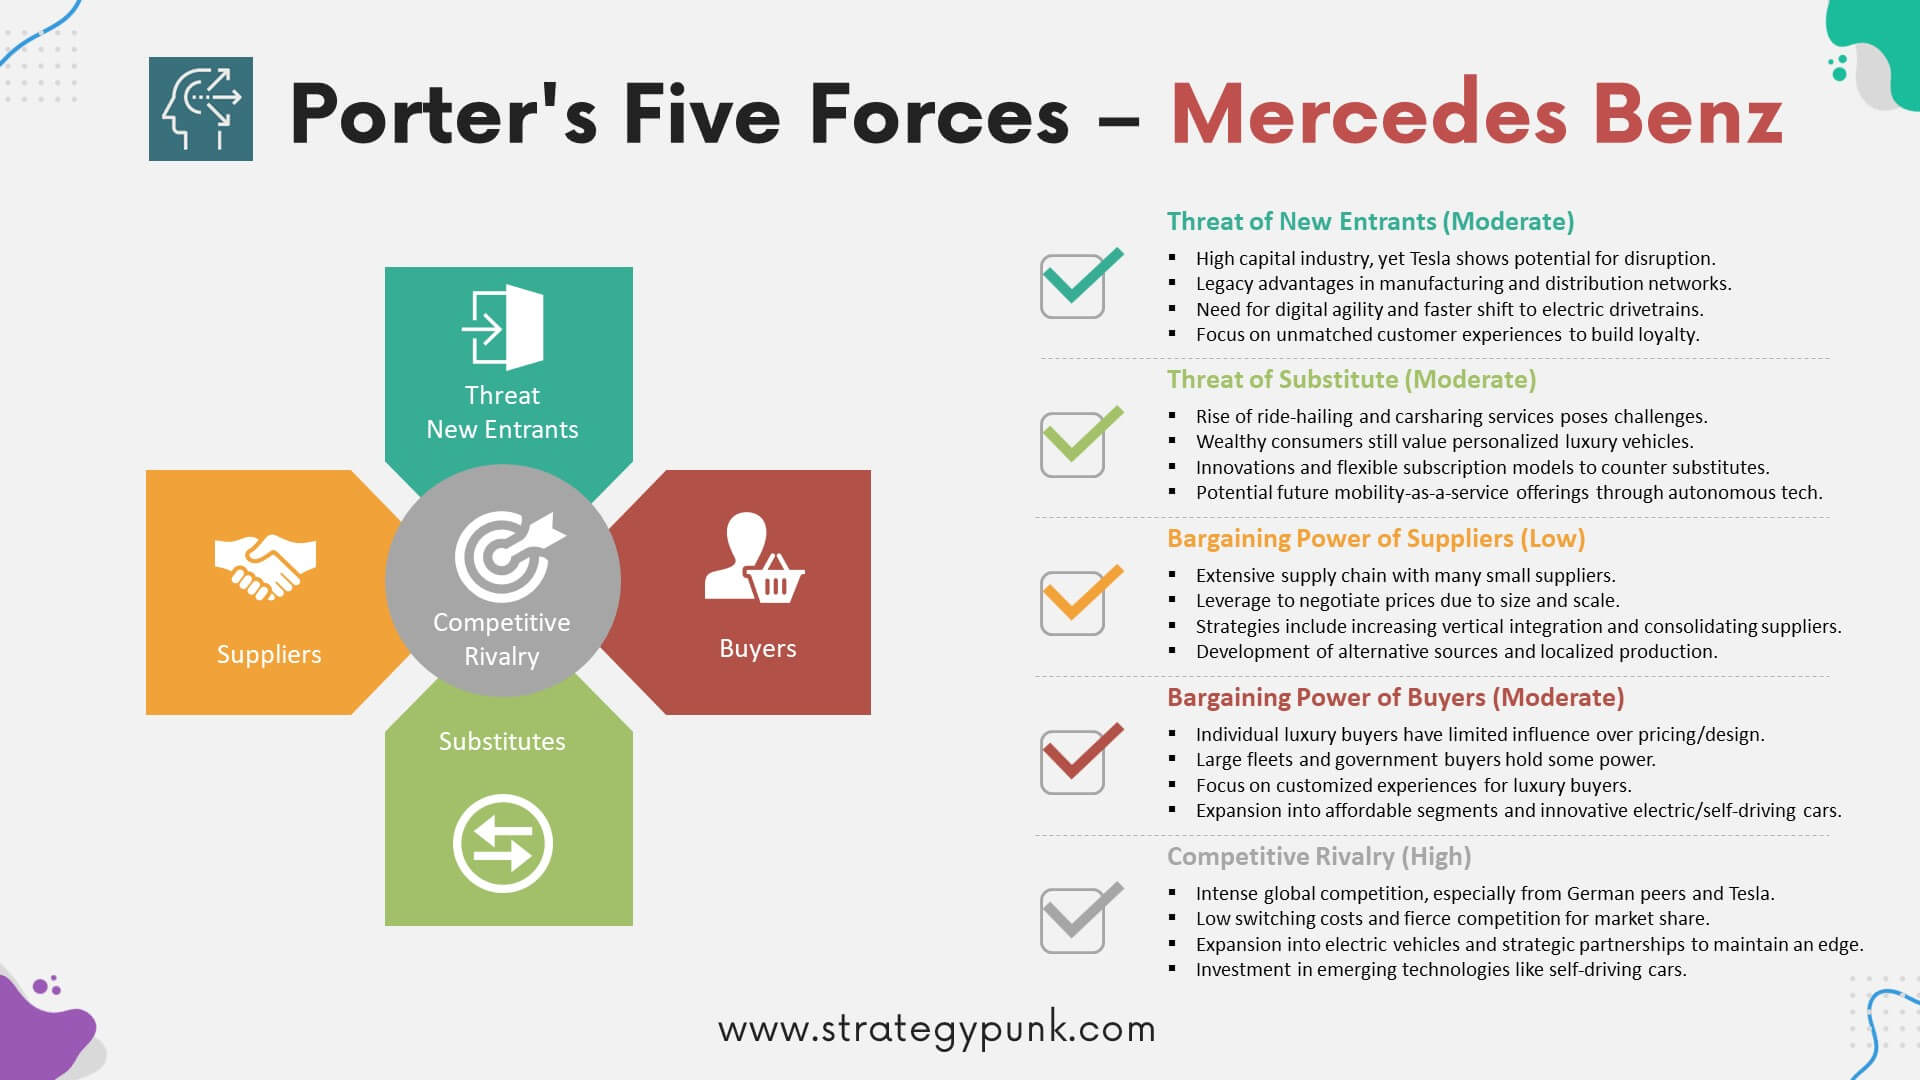 powerpoint presentation for porter's 5 forces